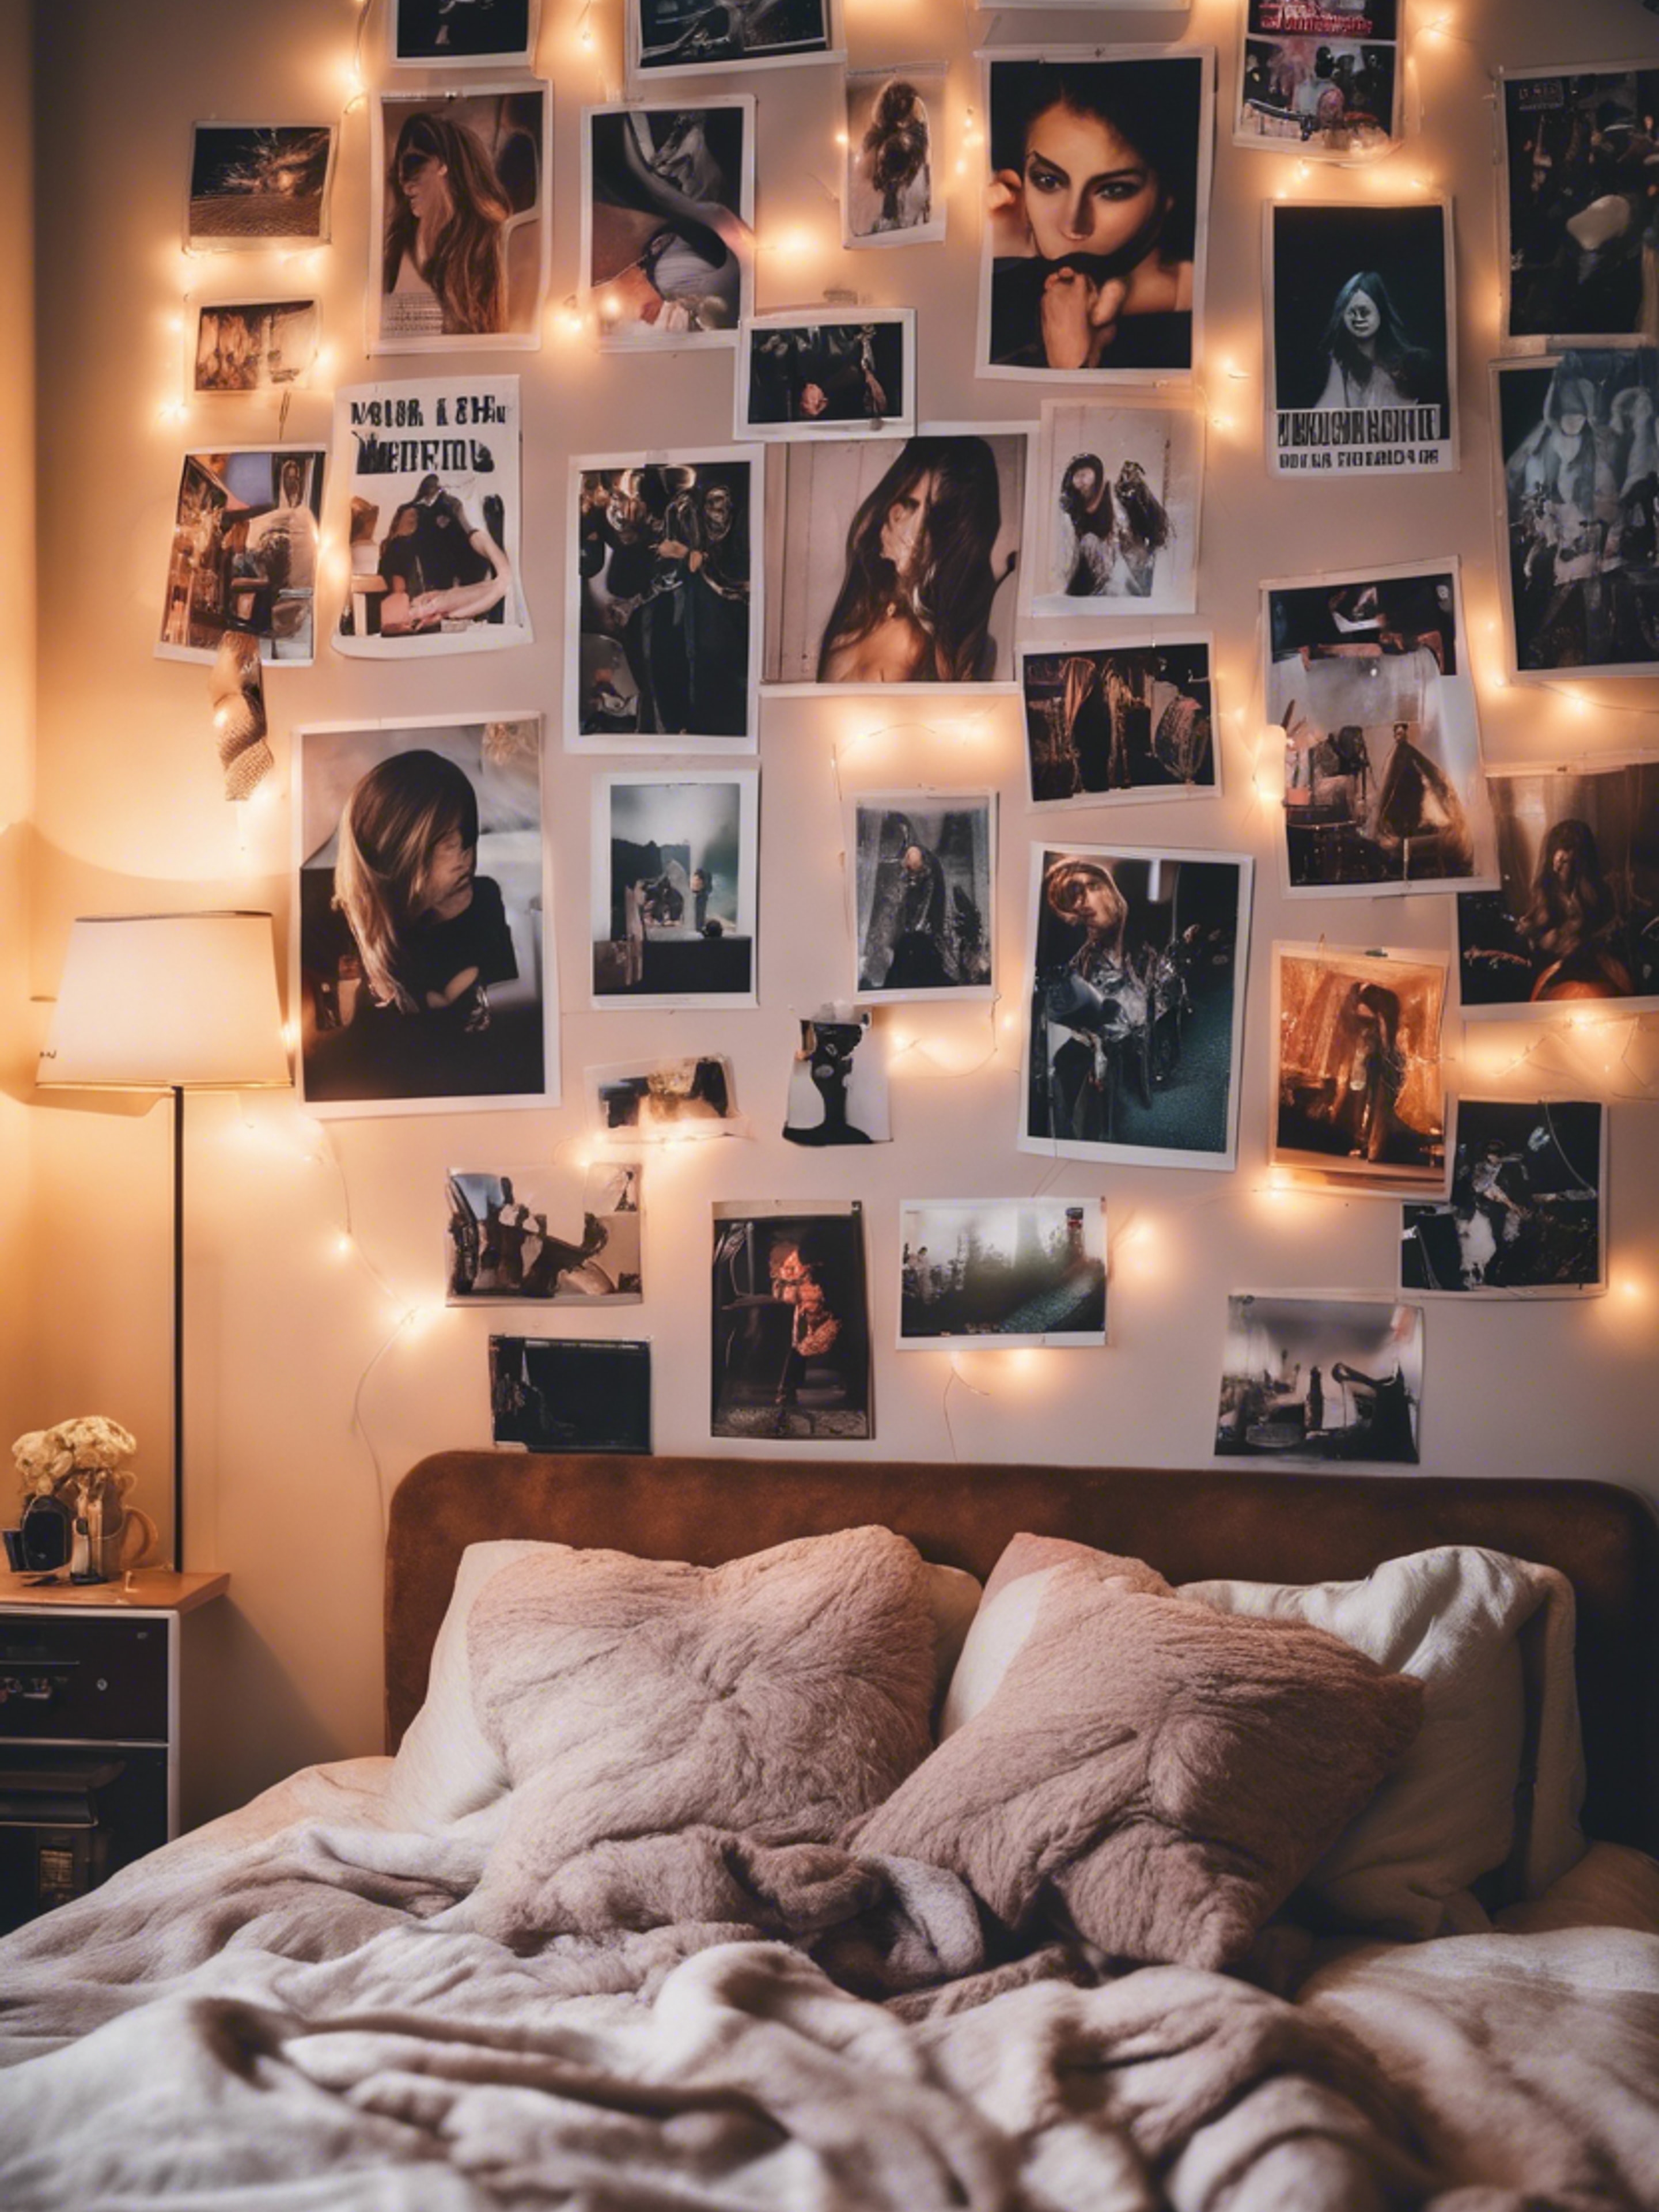 A modern and stylish teenage girl's room decorated with band posters, fairy lights, and polaroid pictures. 벽지[8dbab99d18ae495d873b]